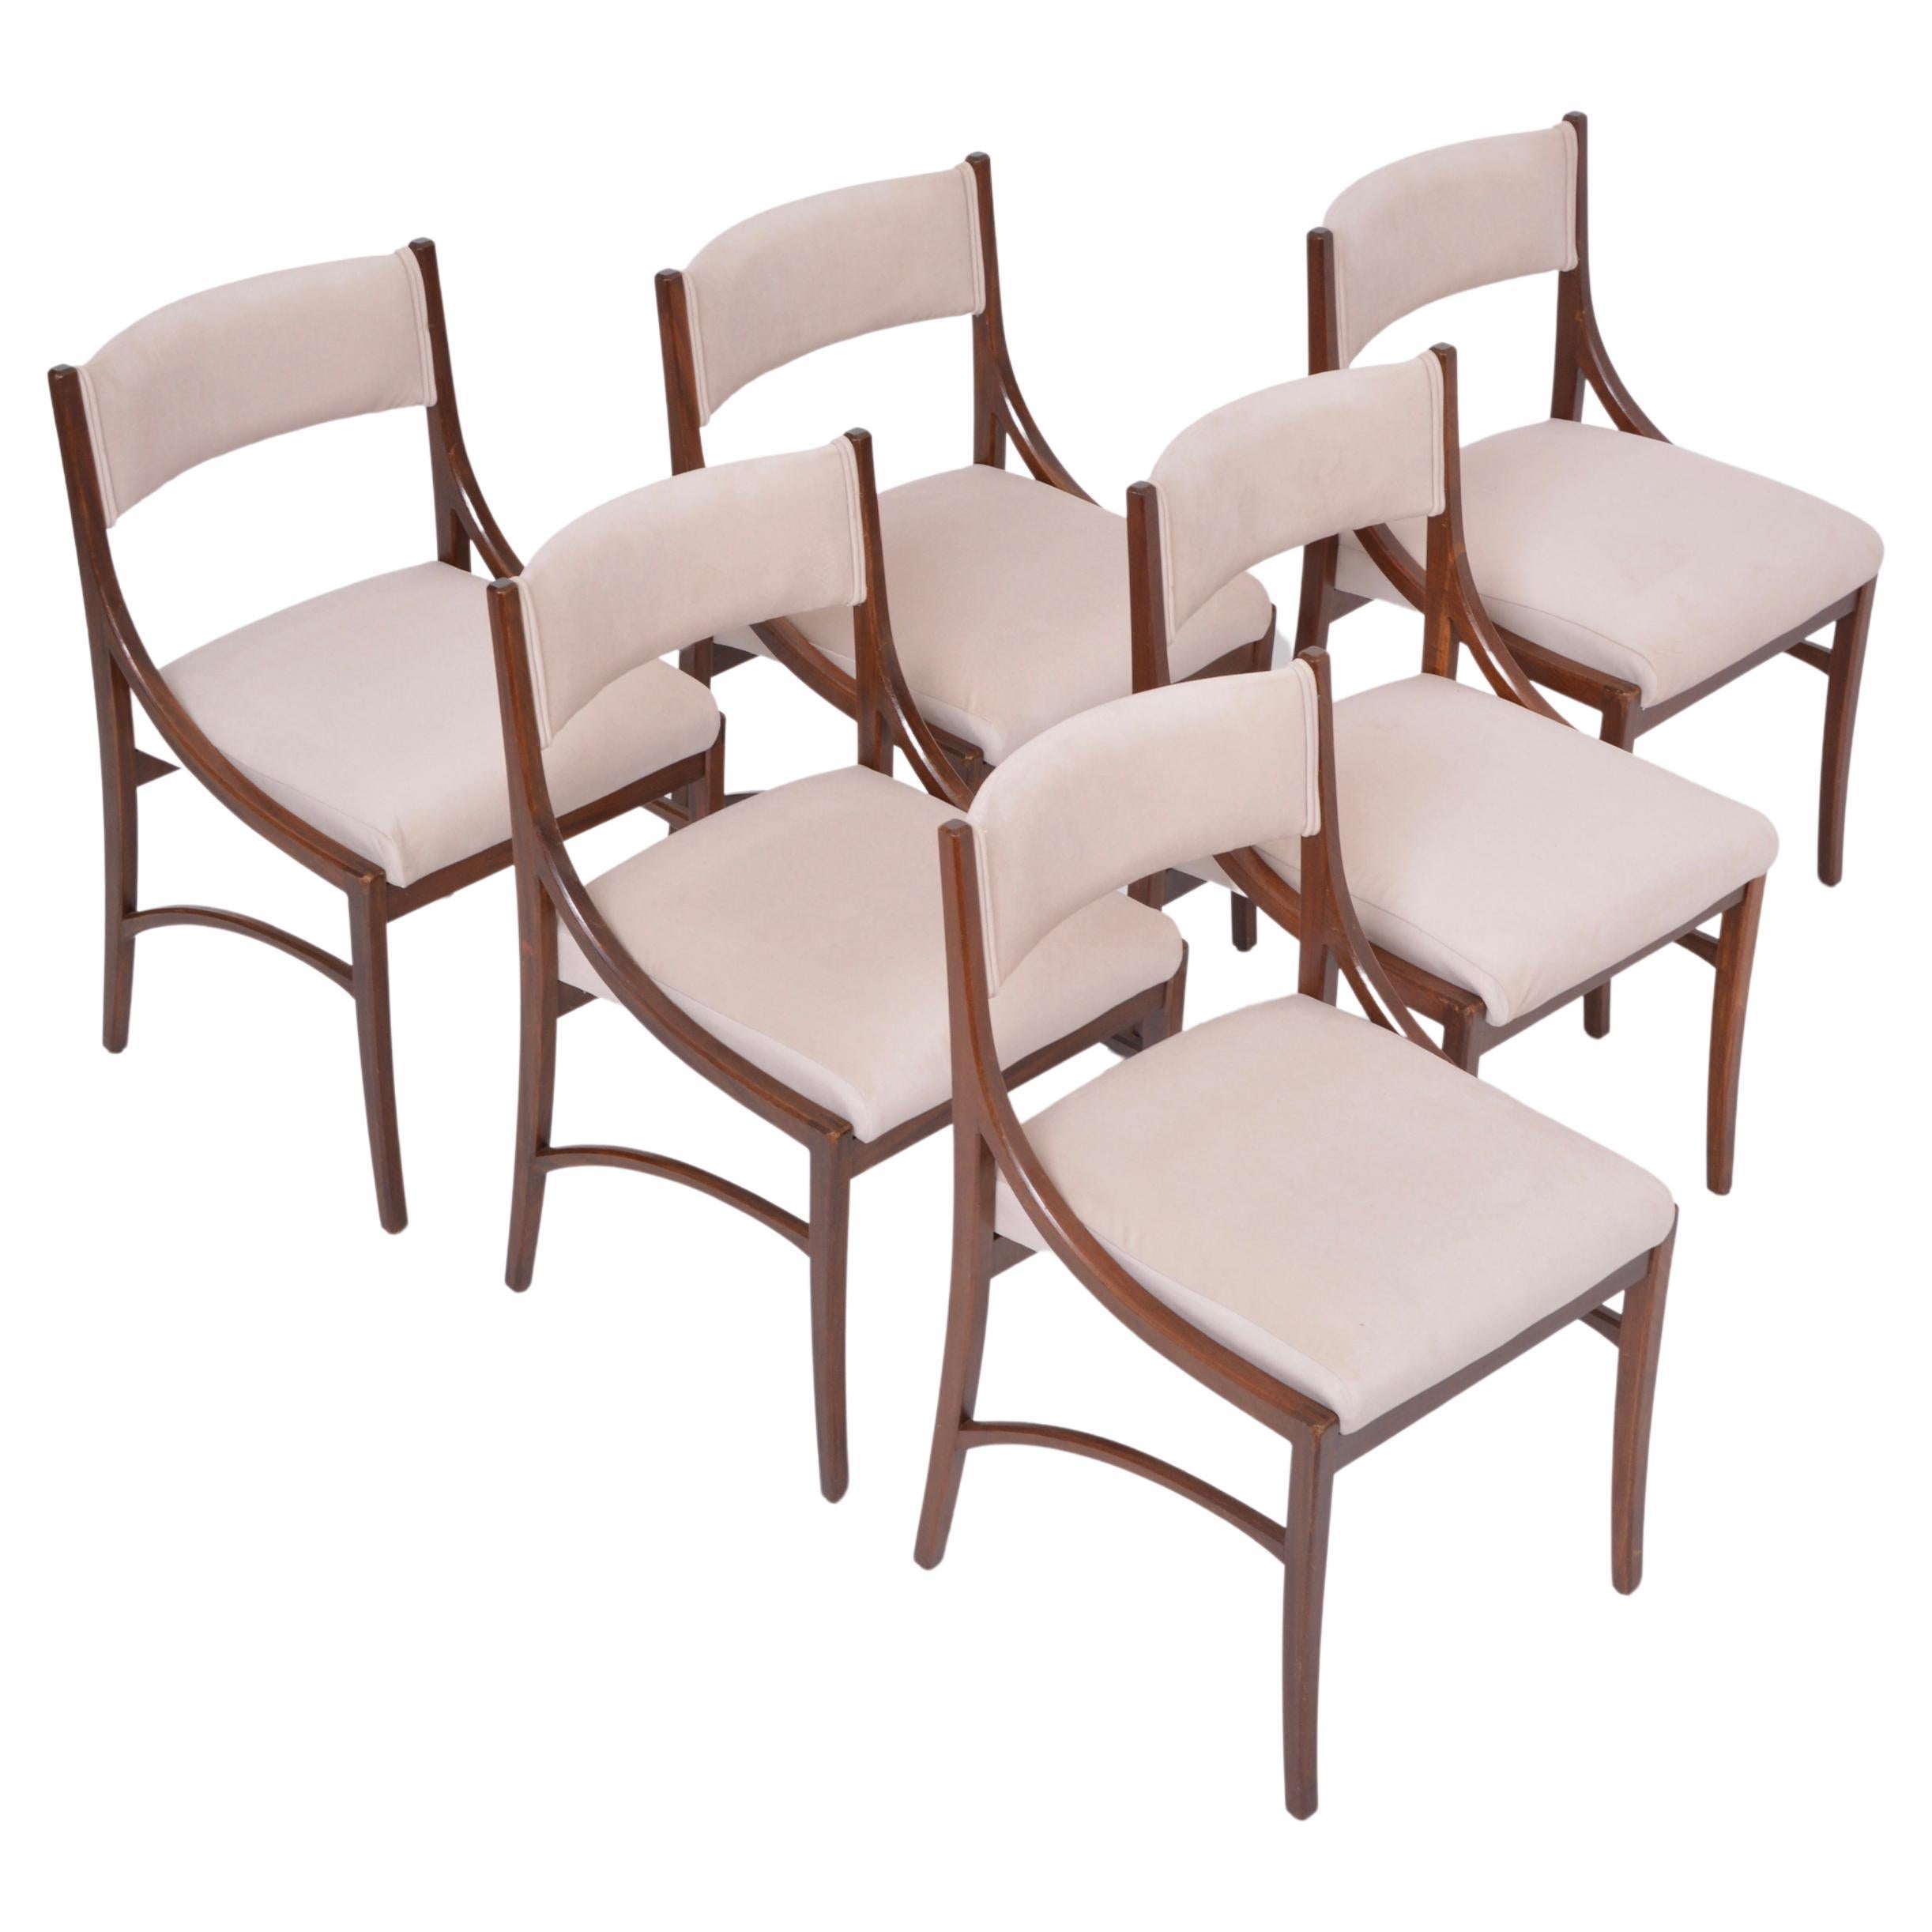 Set of six Mid-Century Modern Beige Dining Chairs by Ico Parisi for Cassina